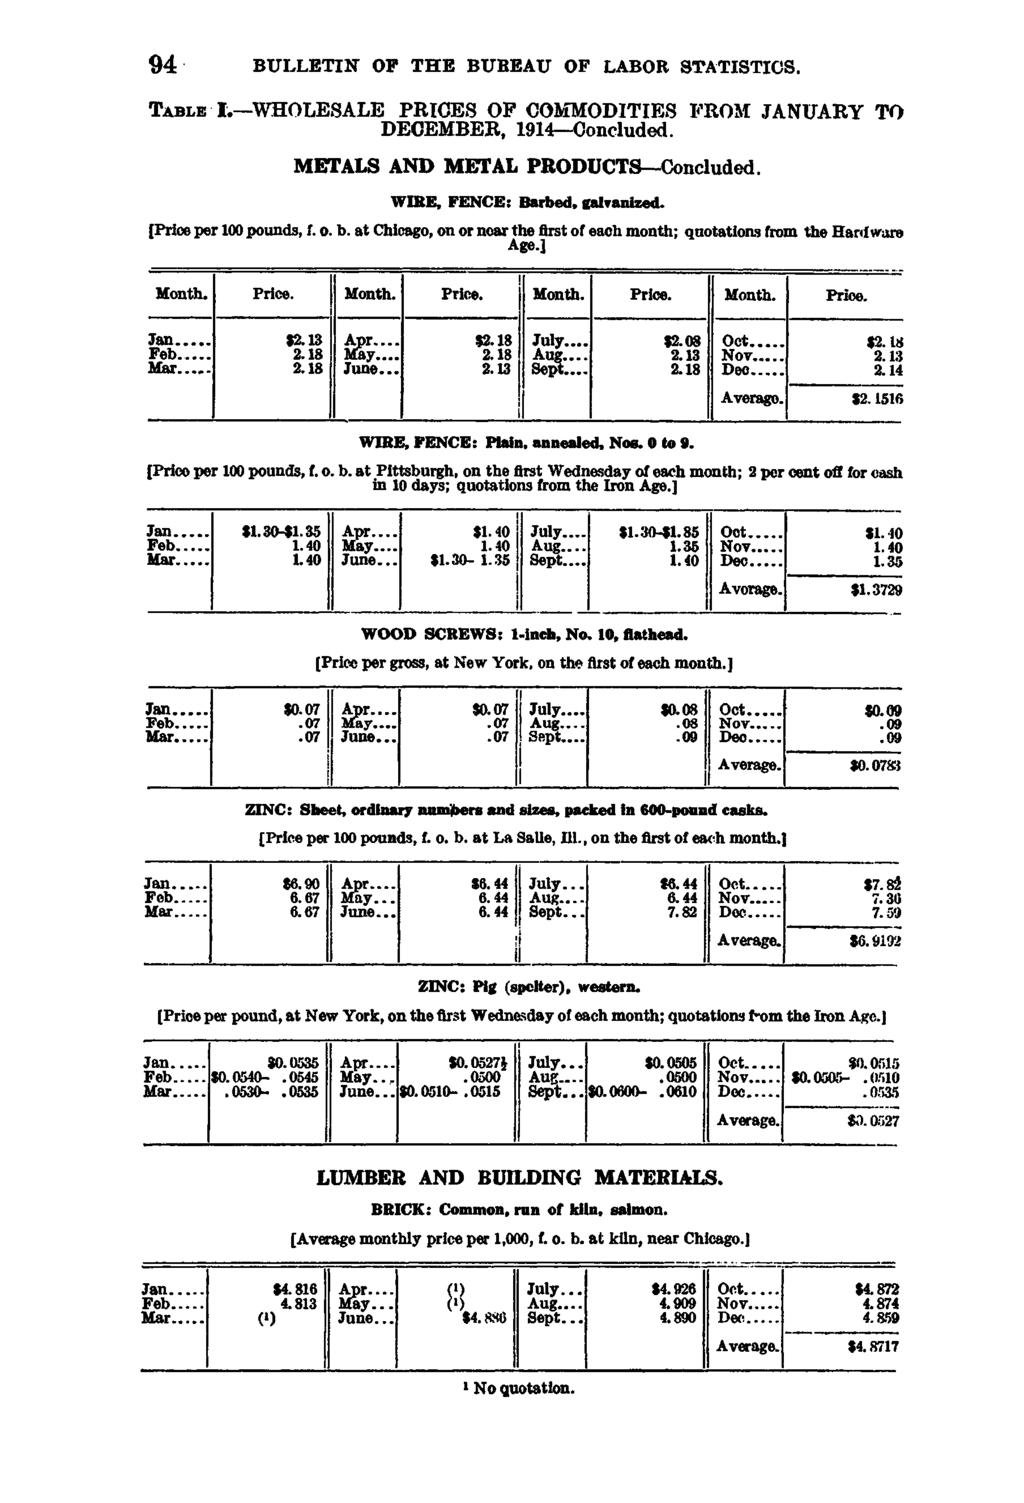 94 BULLETIN OF THE BUREAU OP LABOR STATISTICS. T a b l e I. WHOLESALE PRICES OP COMMODITIES PROM JANUARY TO DECEMBER, 1914 Concluded. METALS AND METAL PRODUCTS Concluded.